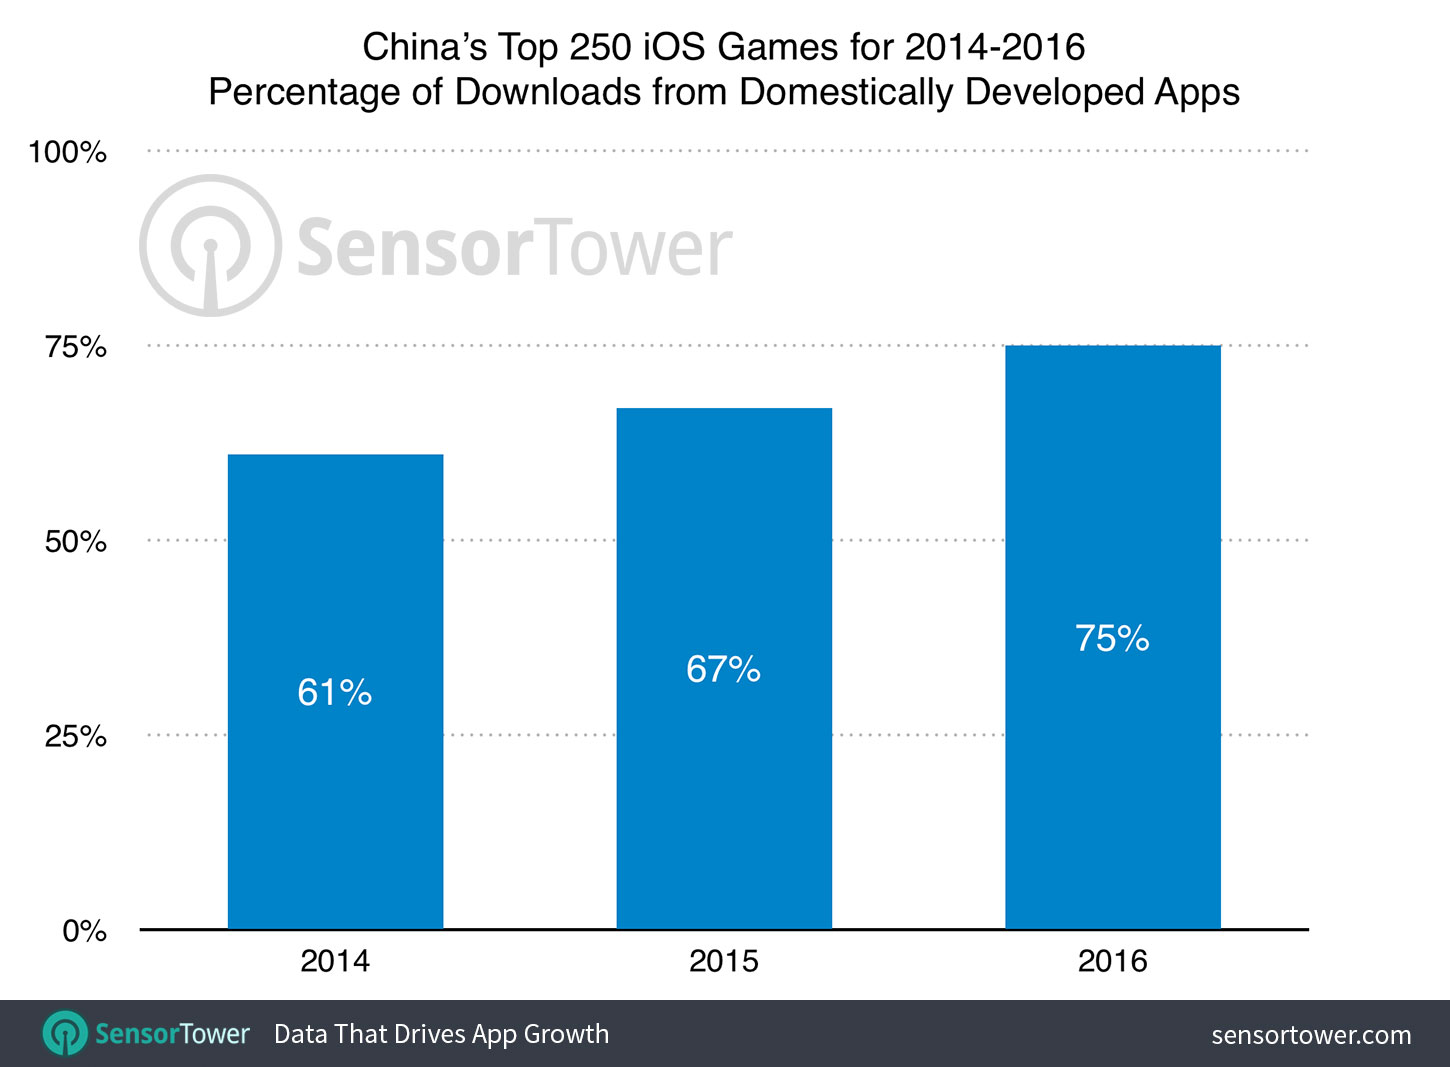 Percentage of downloads for domestically developed iOS mobile games in China 2014 to 2016